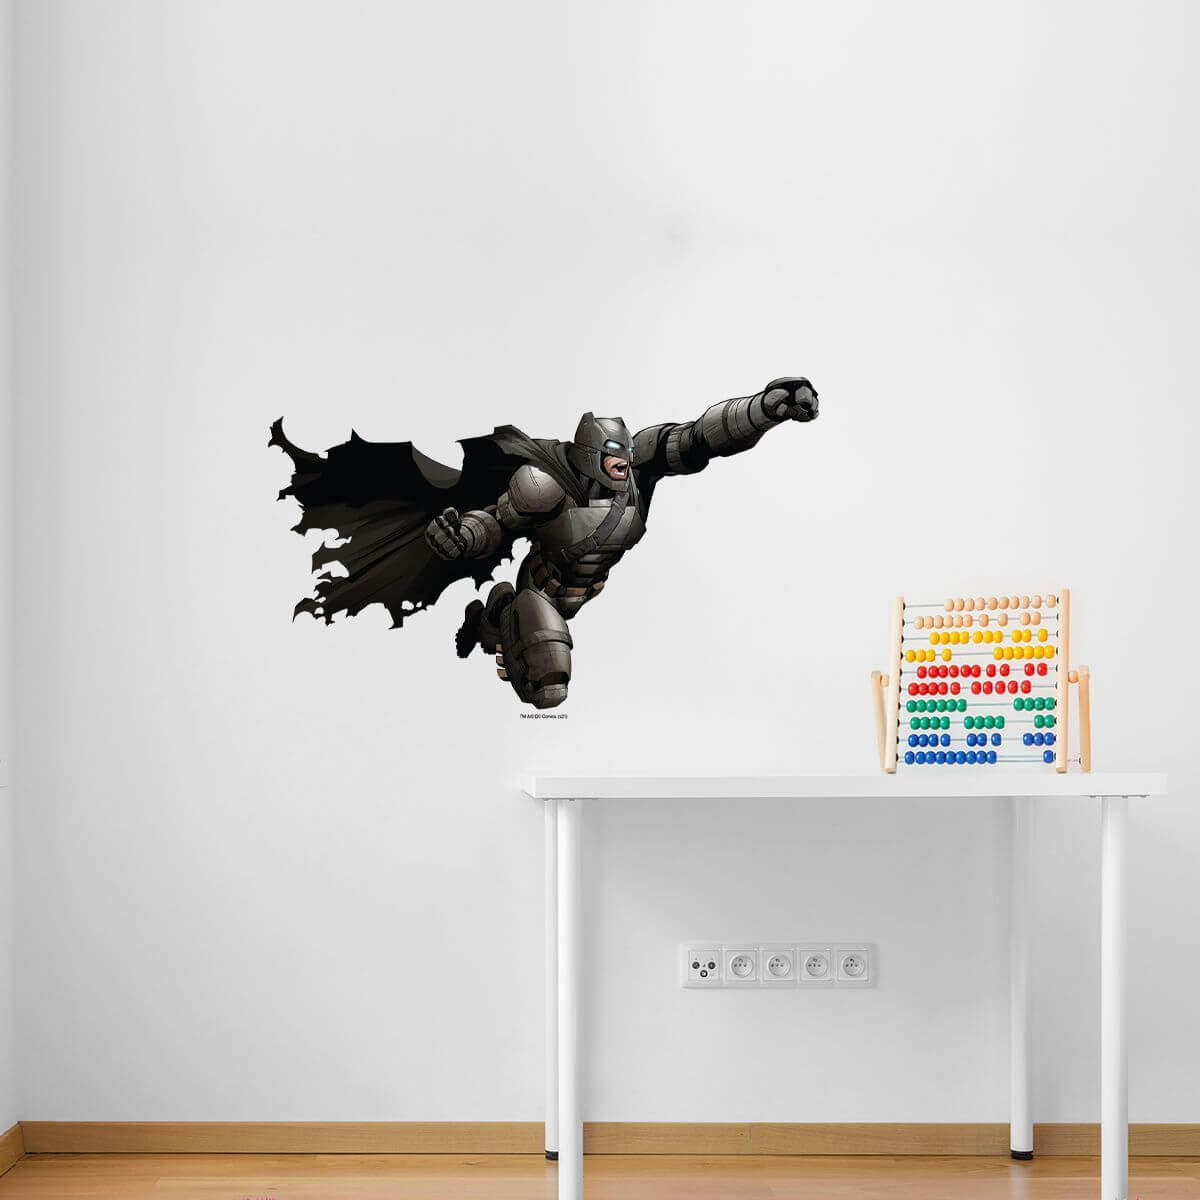 Kismet Decals Armored Batman Attack Licensed Wall Sticker - Easy DIY Justice League Home & Room Decor Wall Art - Kismet Decals